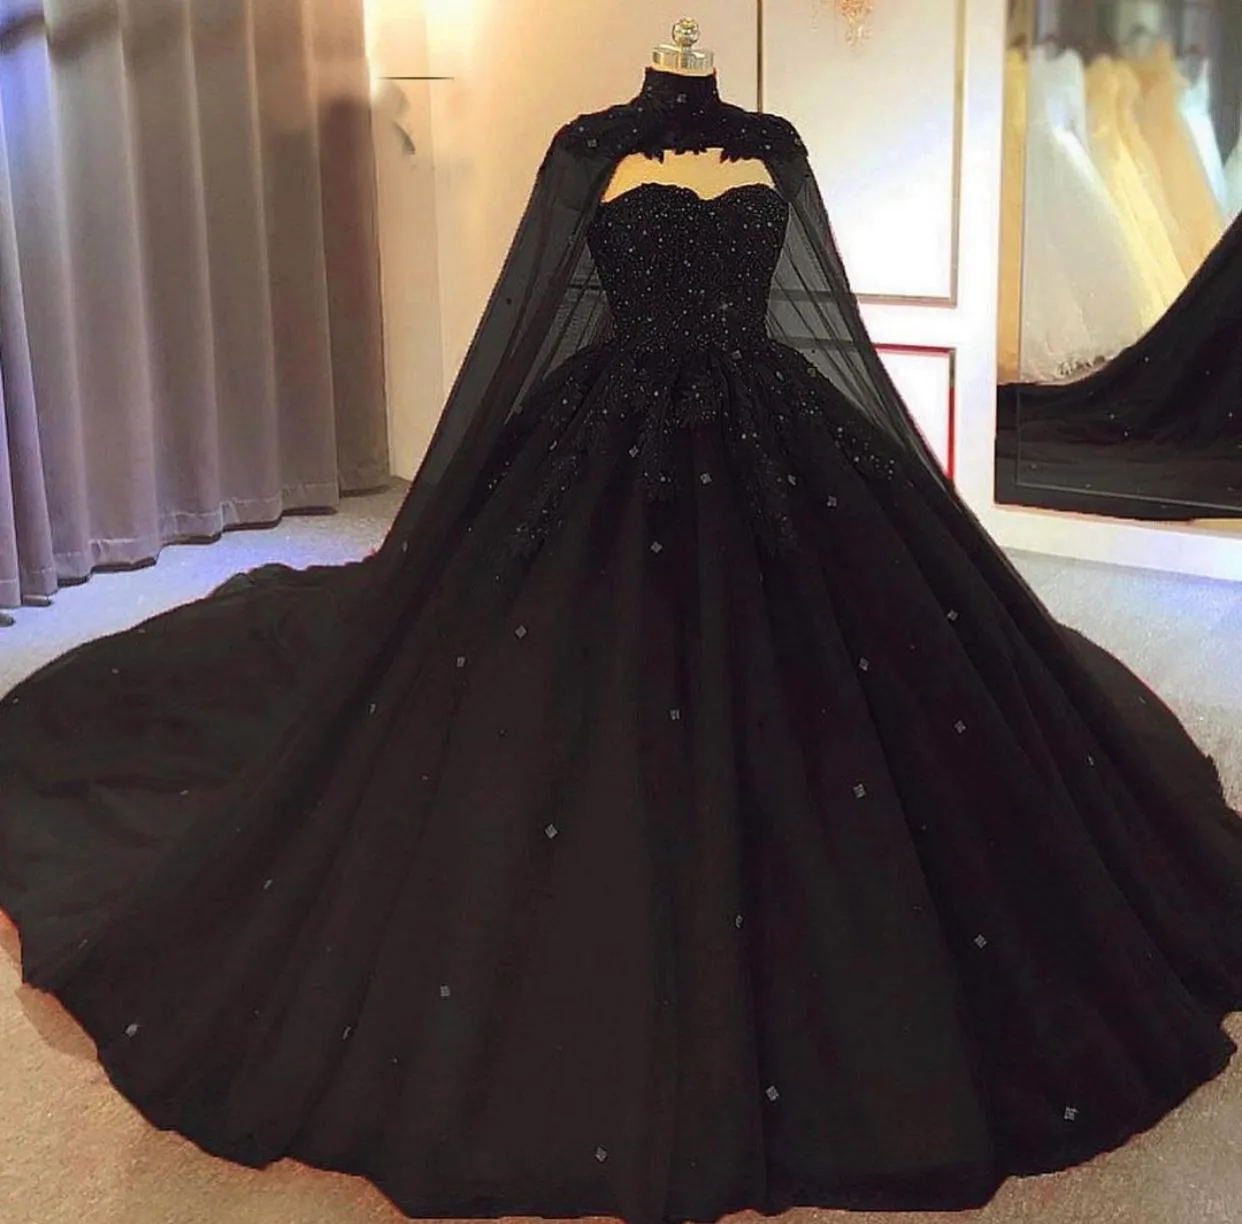 Princess Black Sleeveless Prom Dress Ball Gown Formal Gown With Lace  Appliques sold by dresschic on Storenvy